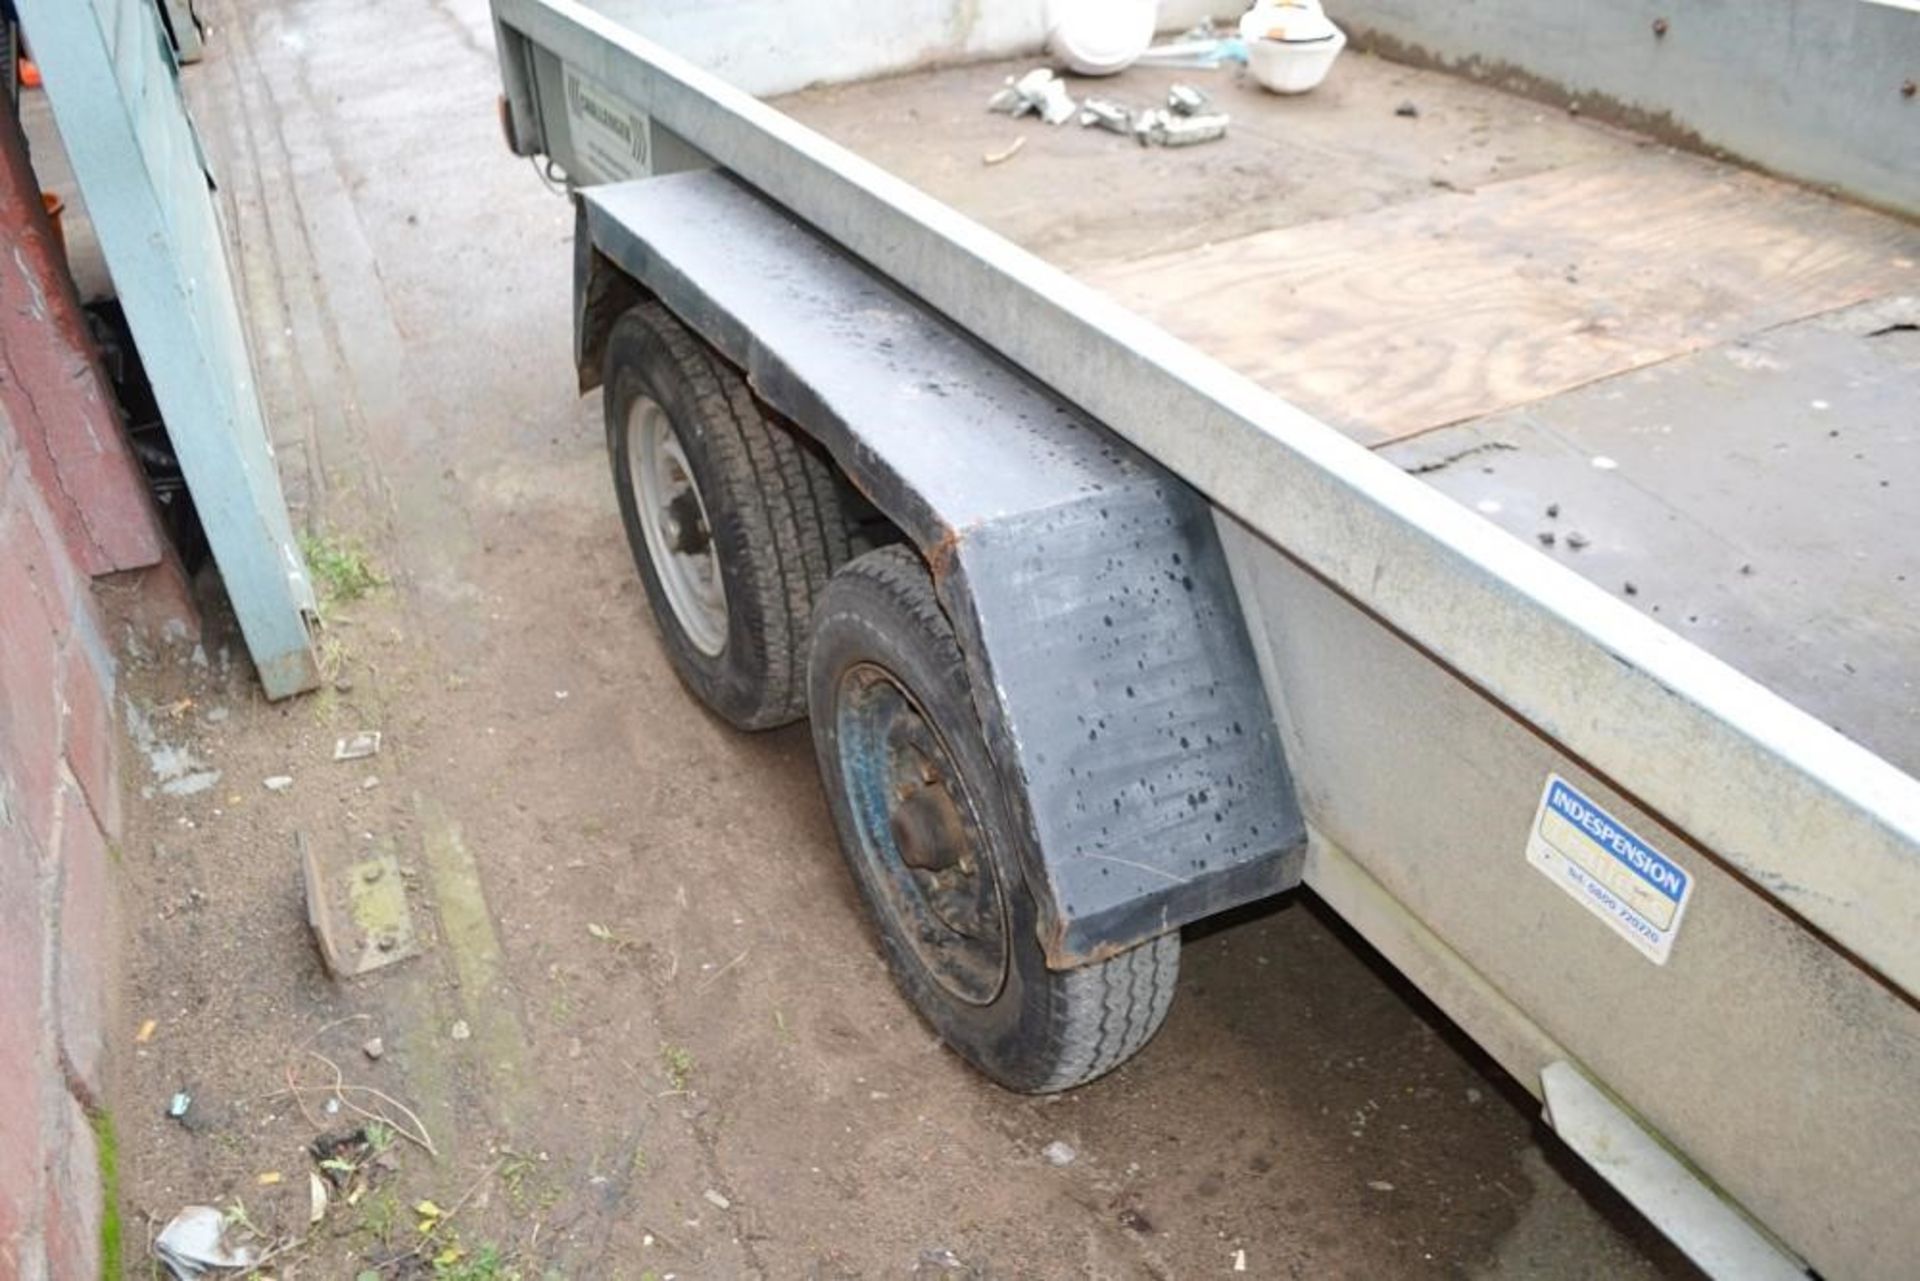 1 x Challenger Indespension 10ft Trailer With 2300Kg Gross Weight - CL464 - Location:Liverpool L19 - Image 8 of 25